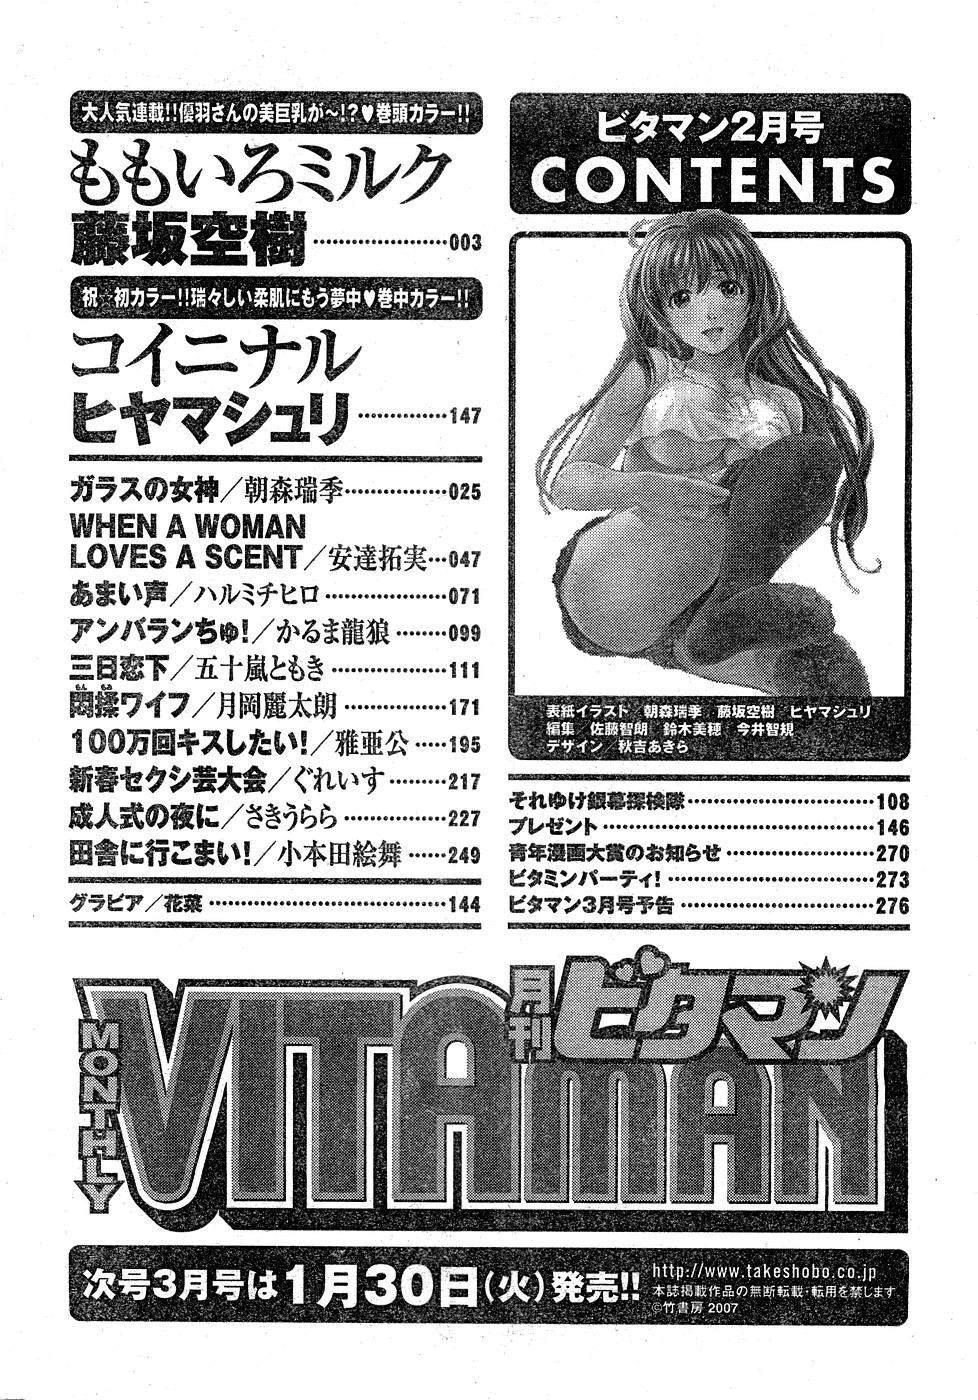 HD Monthly Vitaman 2007-02 Bisex - Page 232